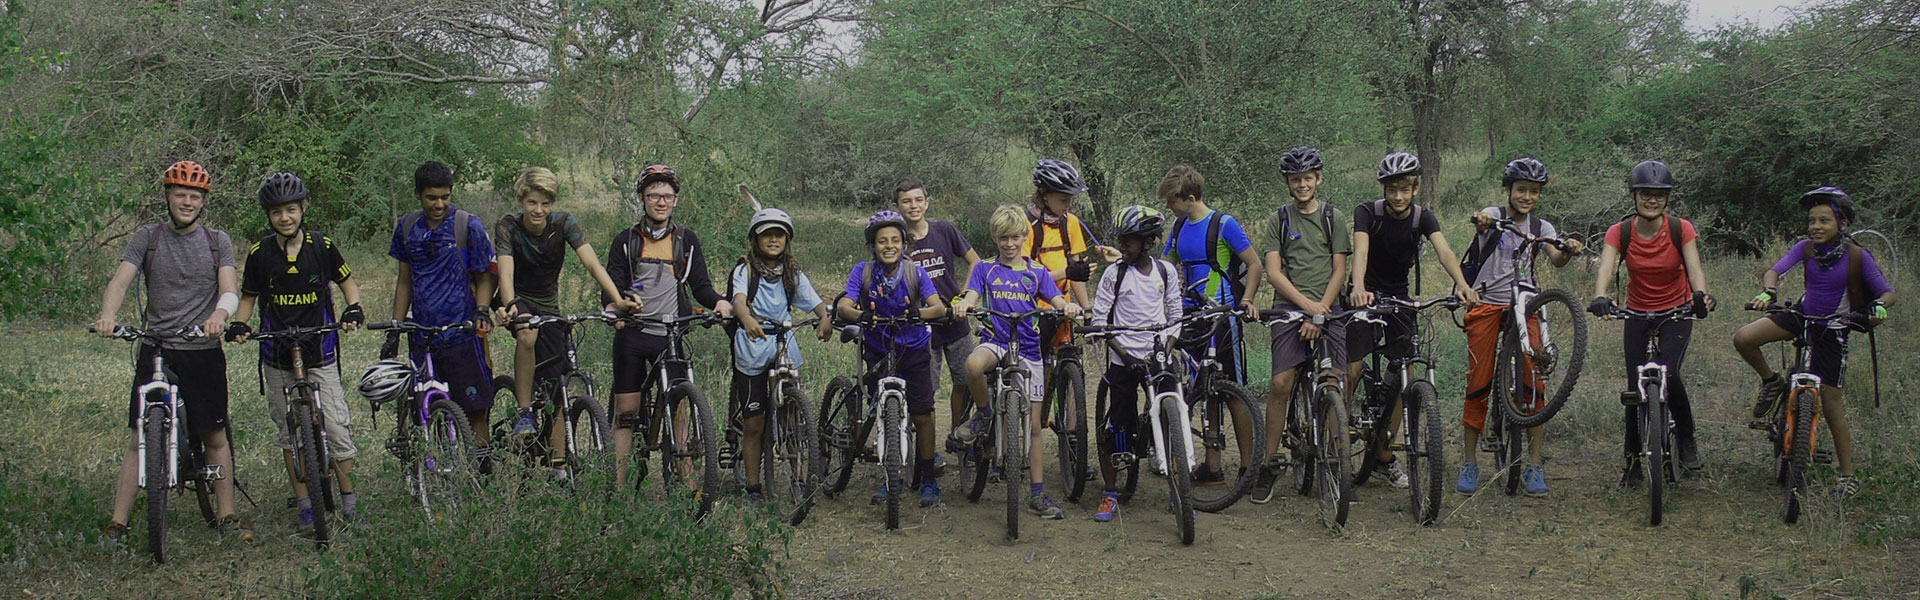 Arusha National Park Cycling Tour